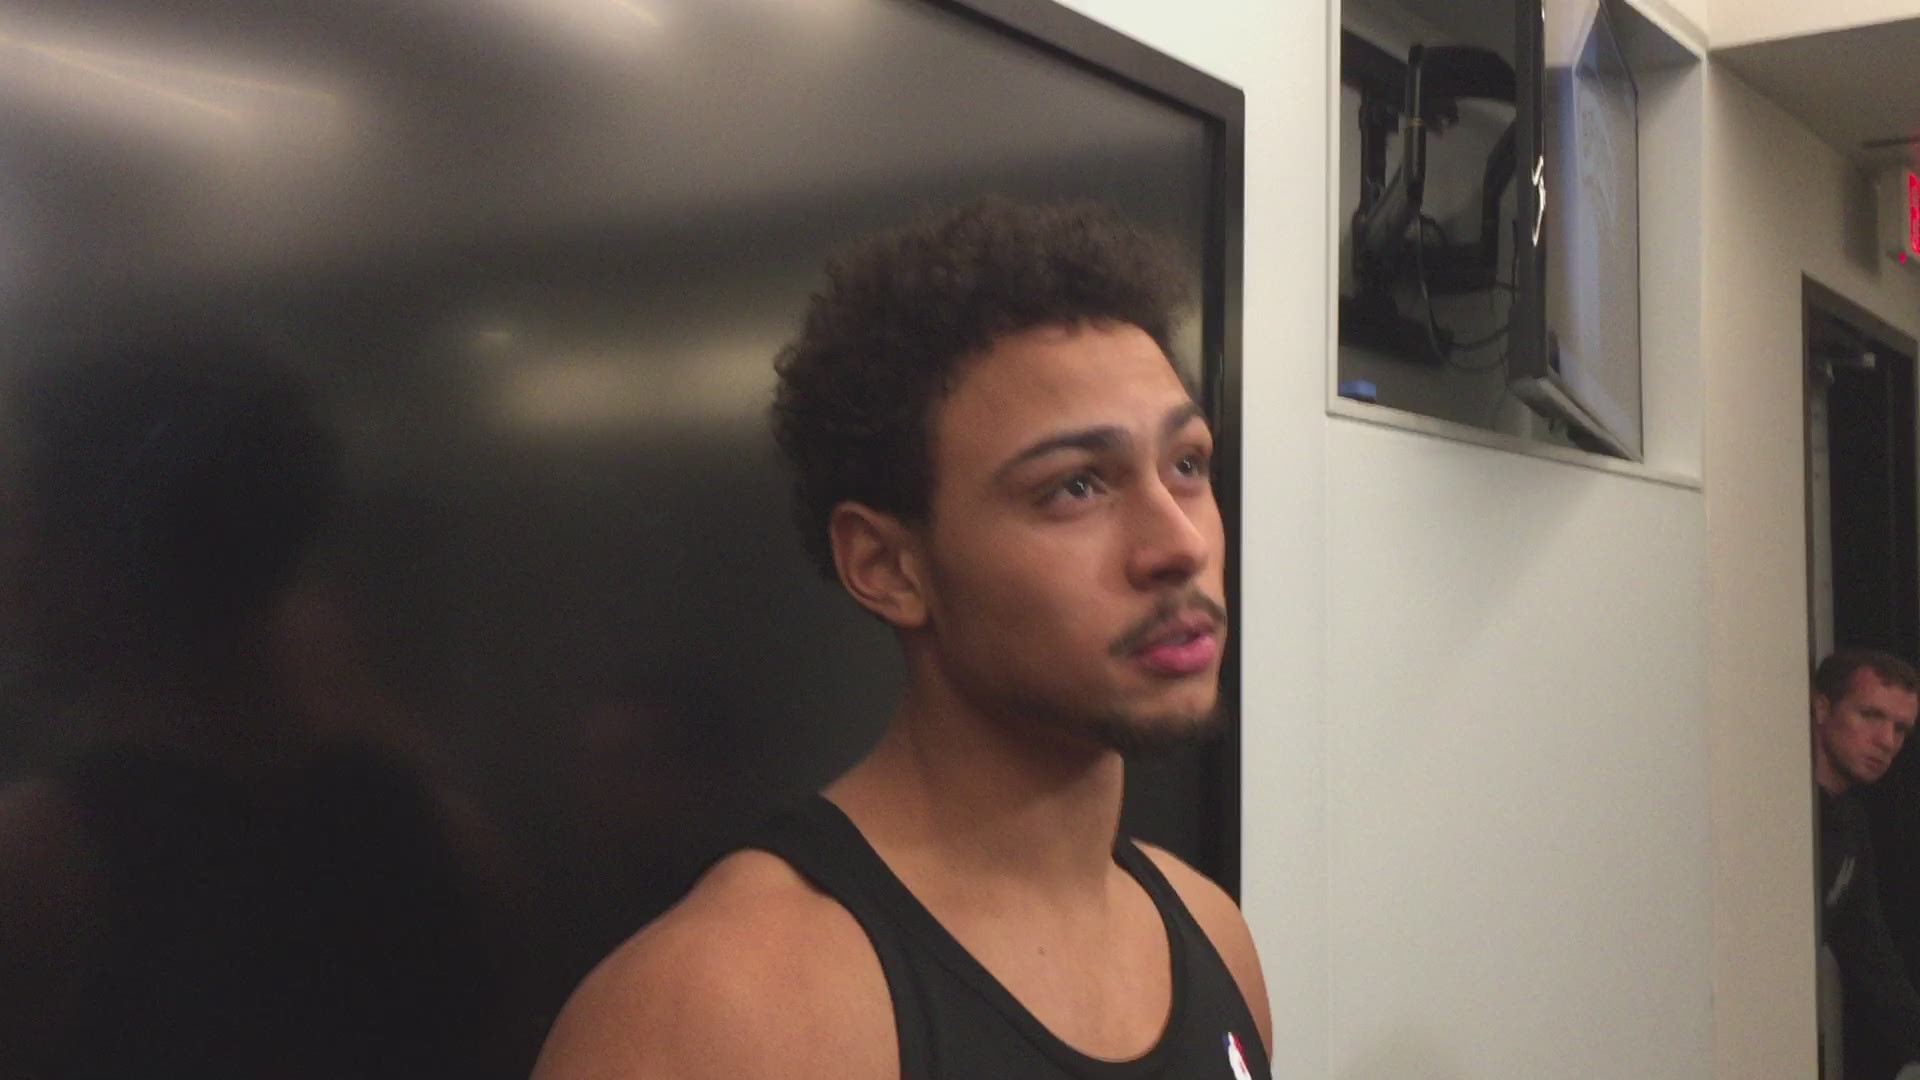 Spurs guard Bryn Forbes talks about Friday night's win over the Lakers